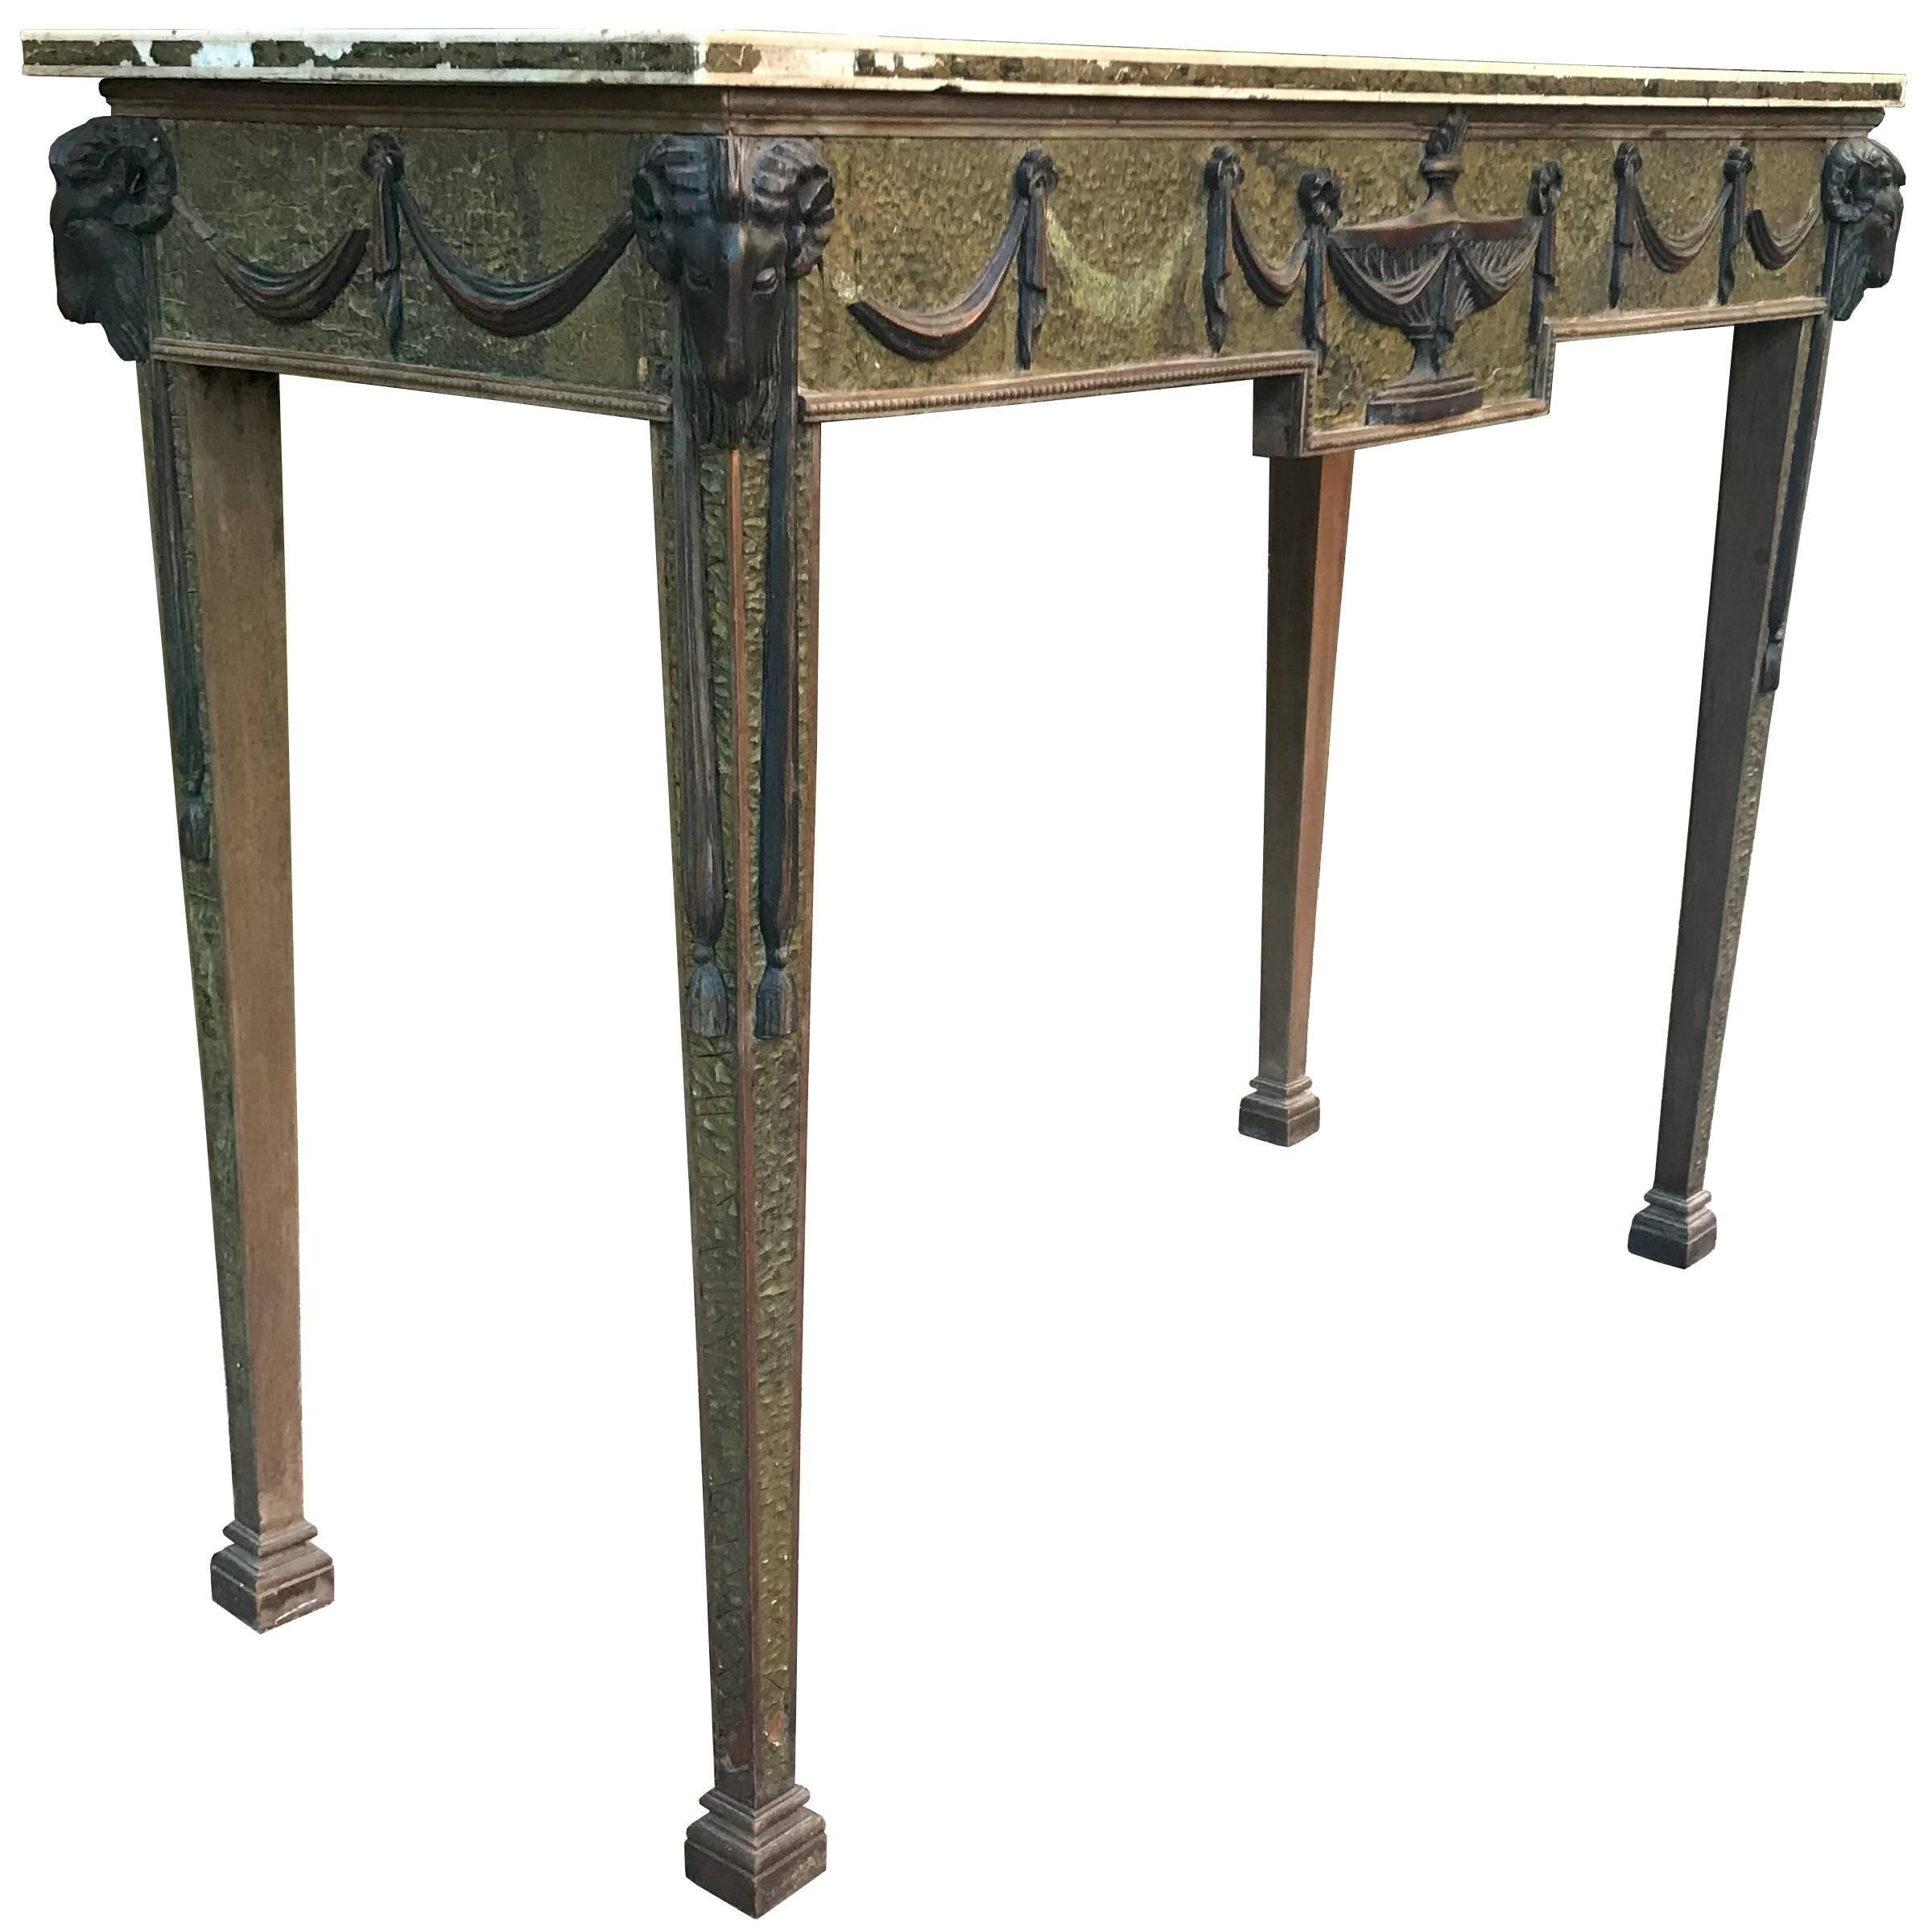 An unbelievably sophisticated yet approachable rare 19th century Adam style console table with scagliola finish and wood goat head, urn, and swag applied decorations. The top is marble with neoclassical etched Greek Key pattern with more inlaid